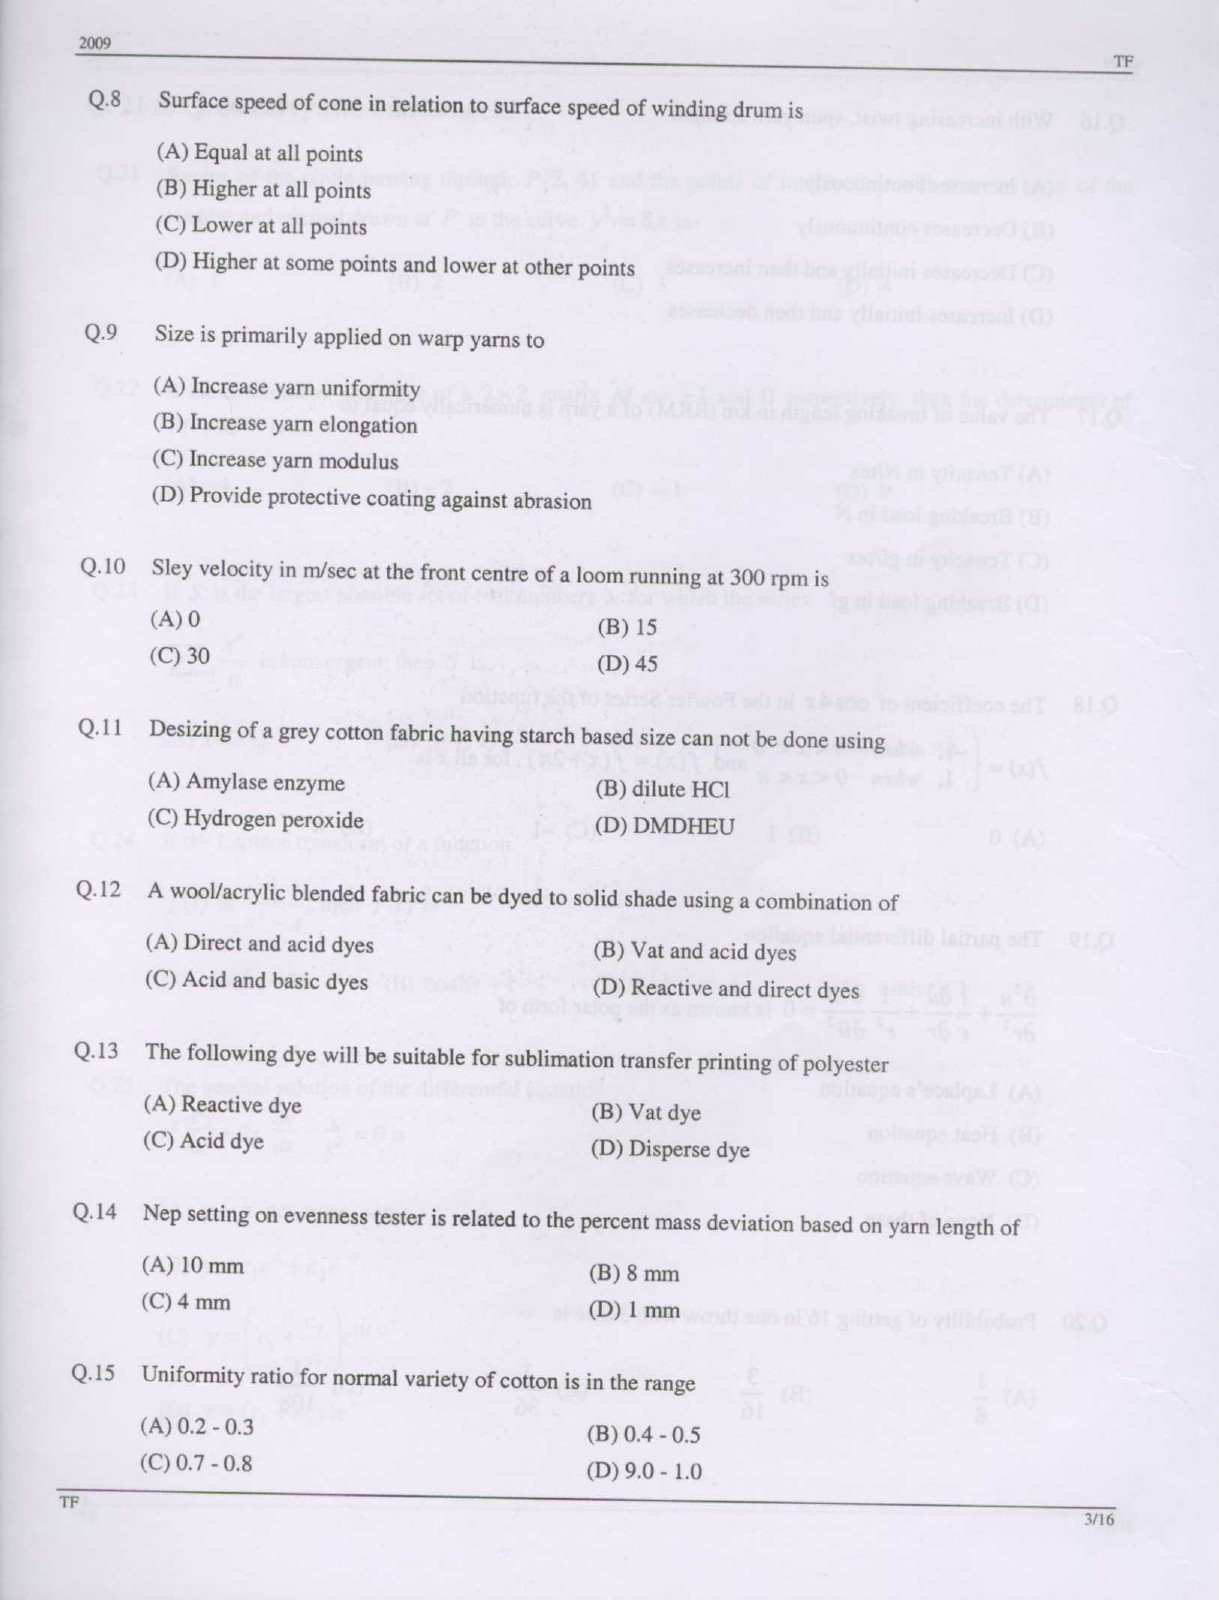 GATE Exam Question Paper 2009 Textile Engineering and Fibre Science 3